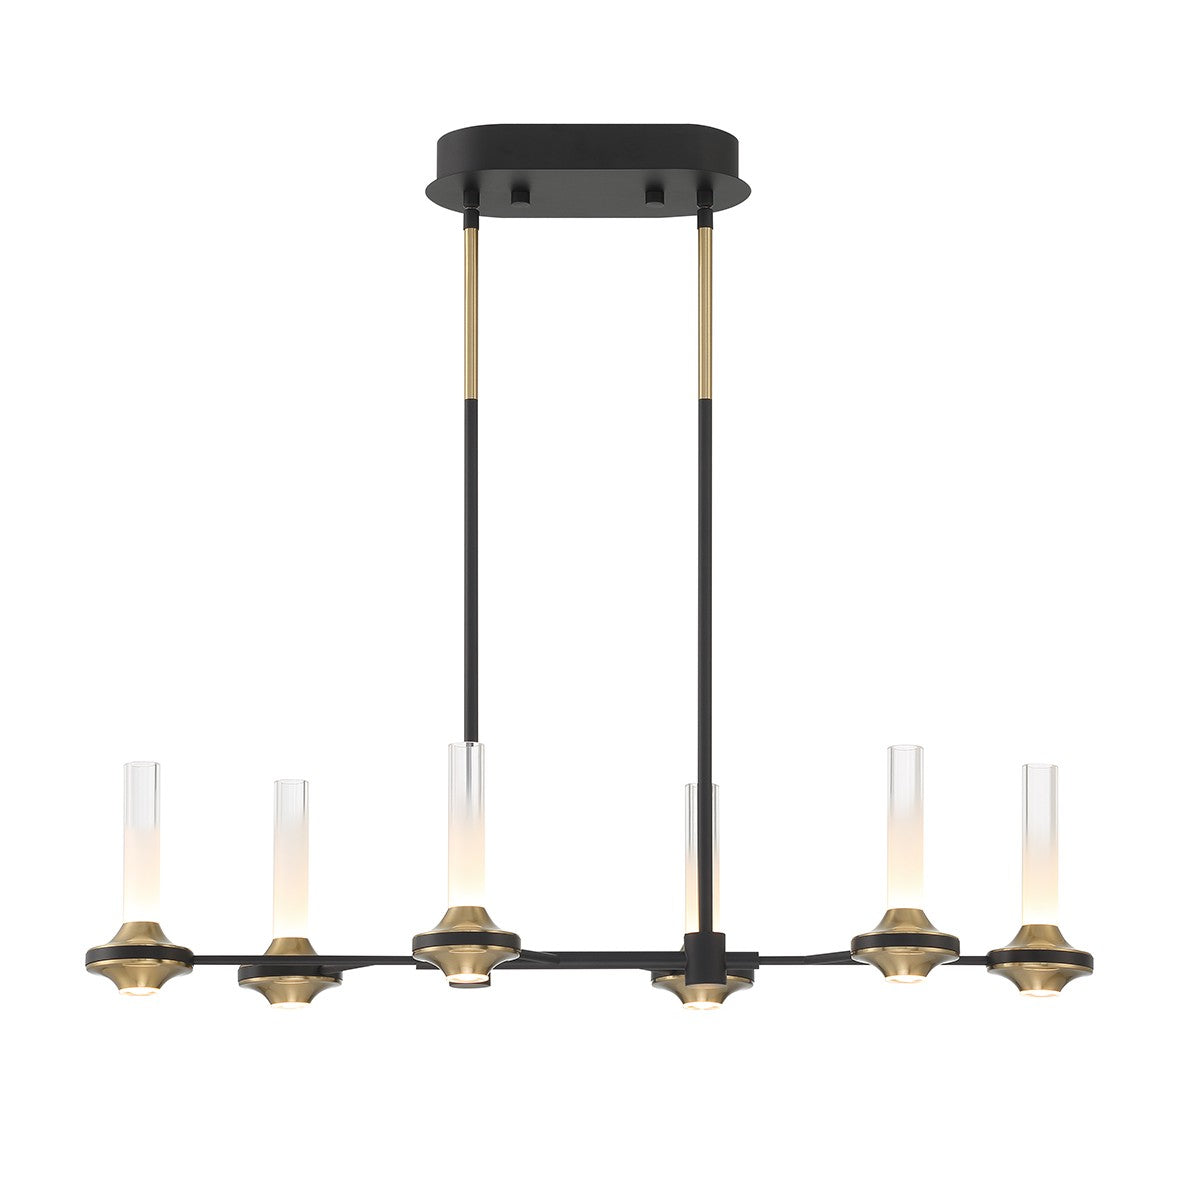 Eurofase Canada - 45713-019 - LED Chandelier - Torcia - Black and Brass